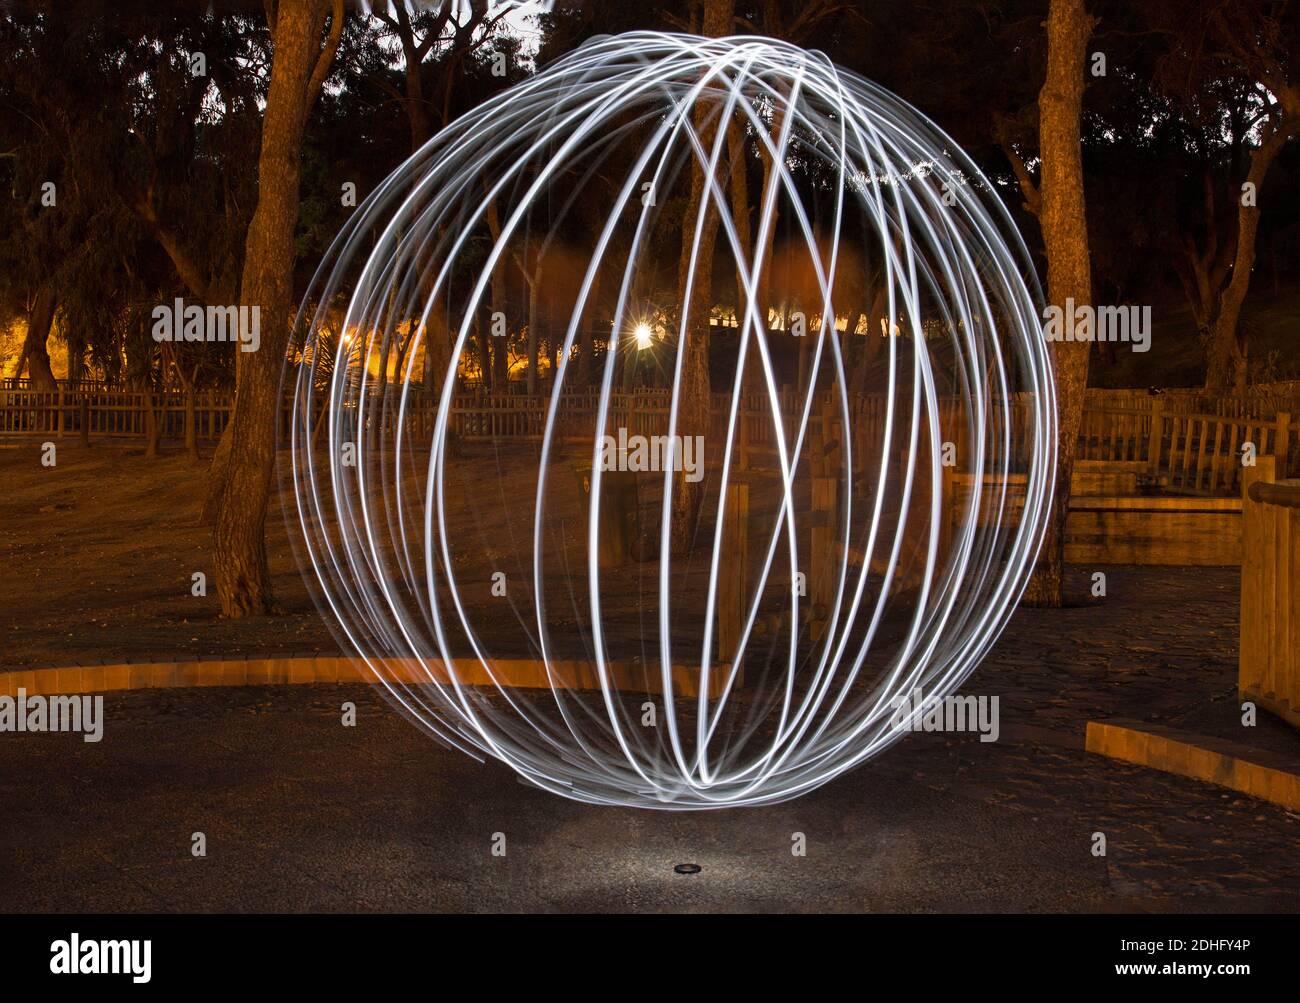 Experiment using torches in the park to create a ball of light. The camera set with an open shutter. Photographed in Guardamar, Alicante, Spain. Stock Photo